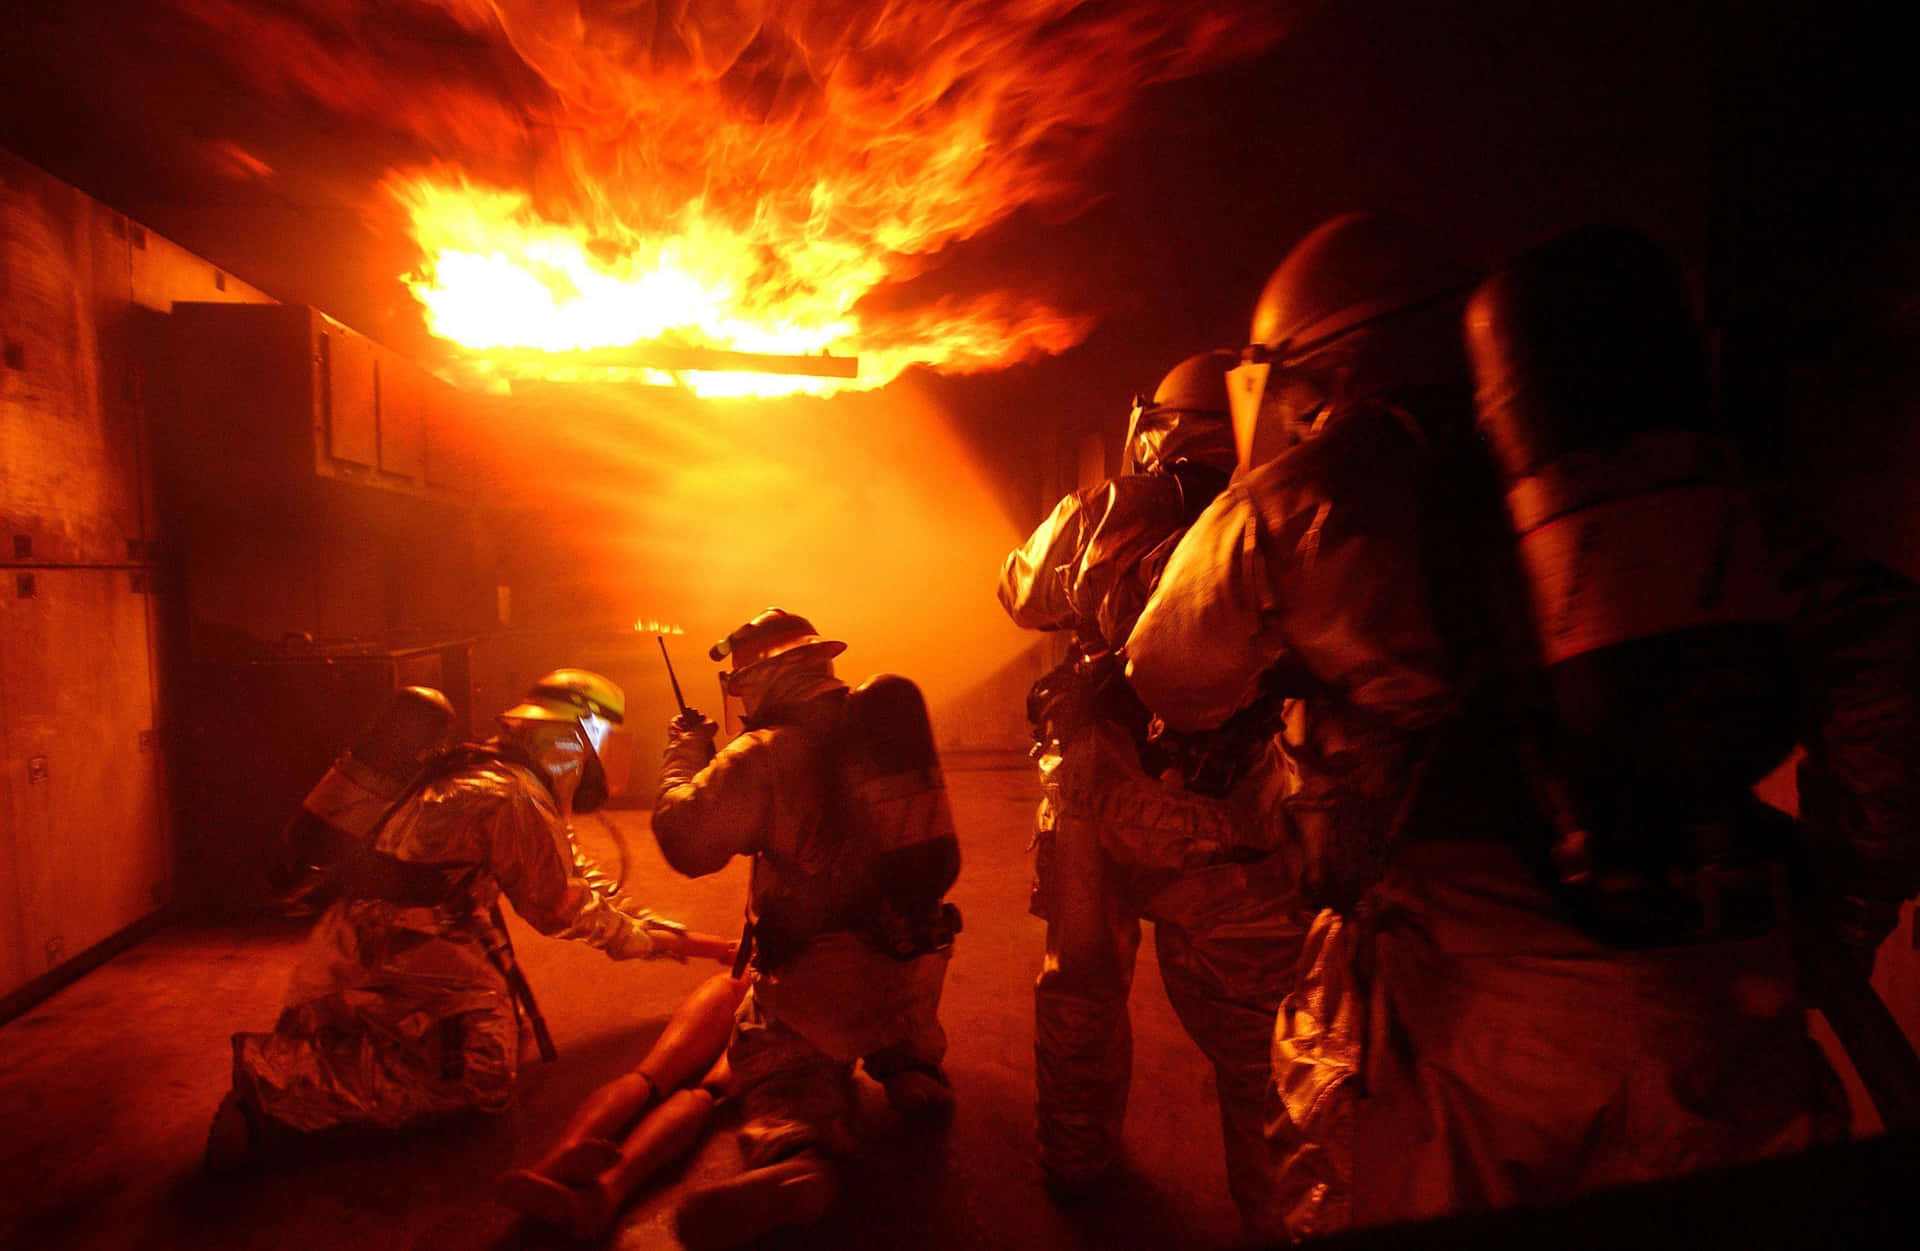 A Group Of Firefighters In A Dark Room